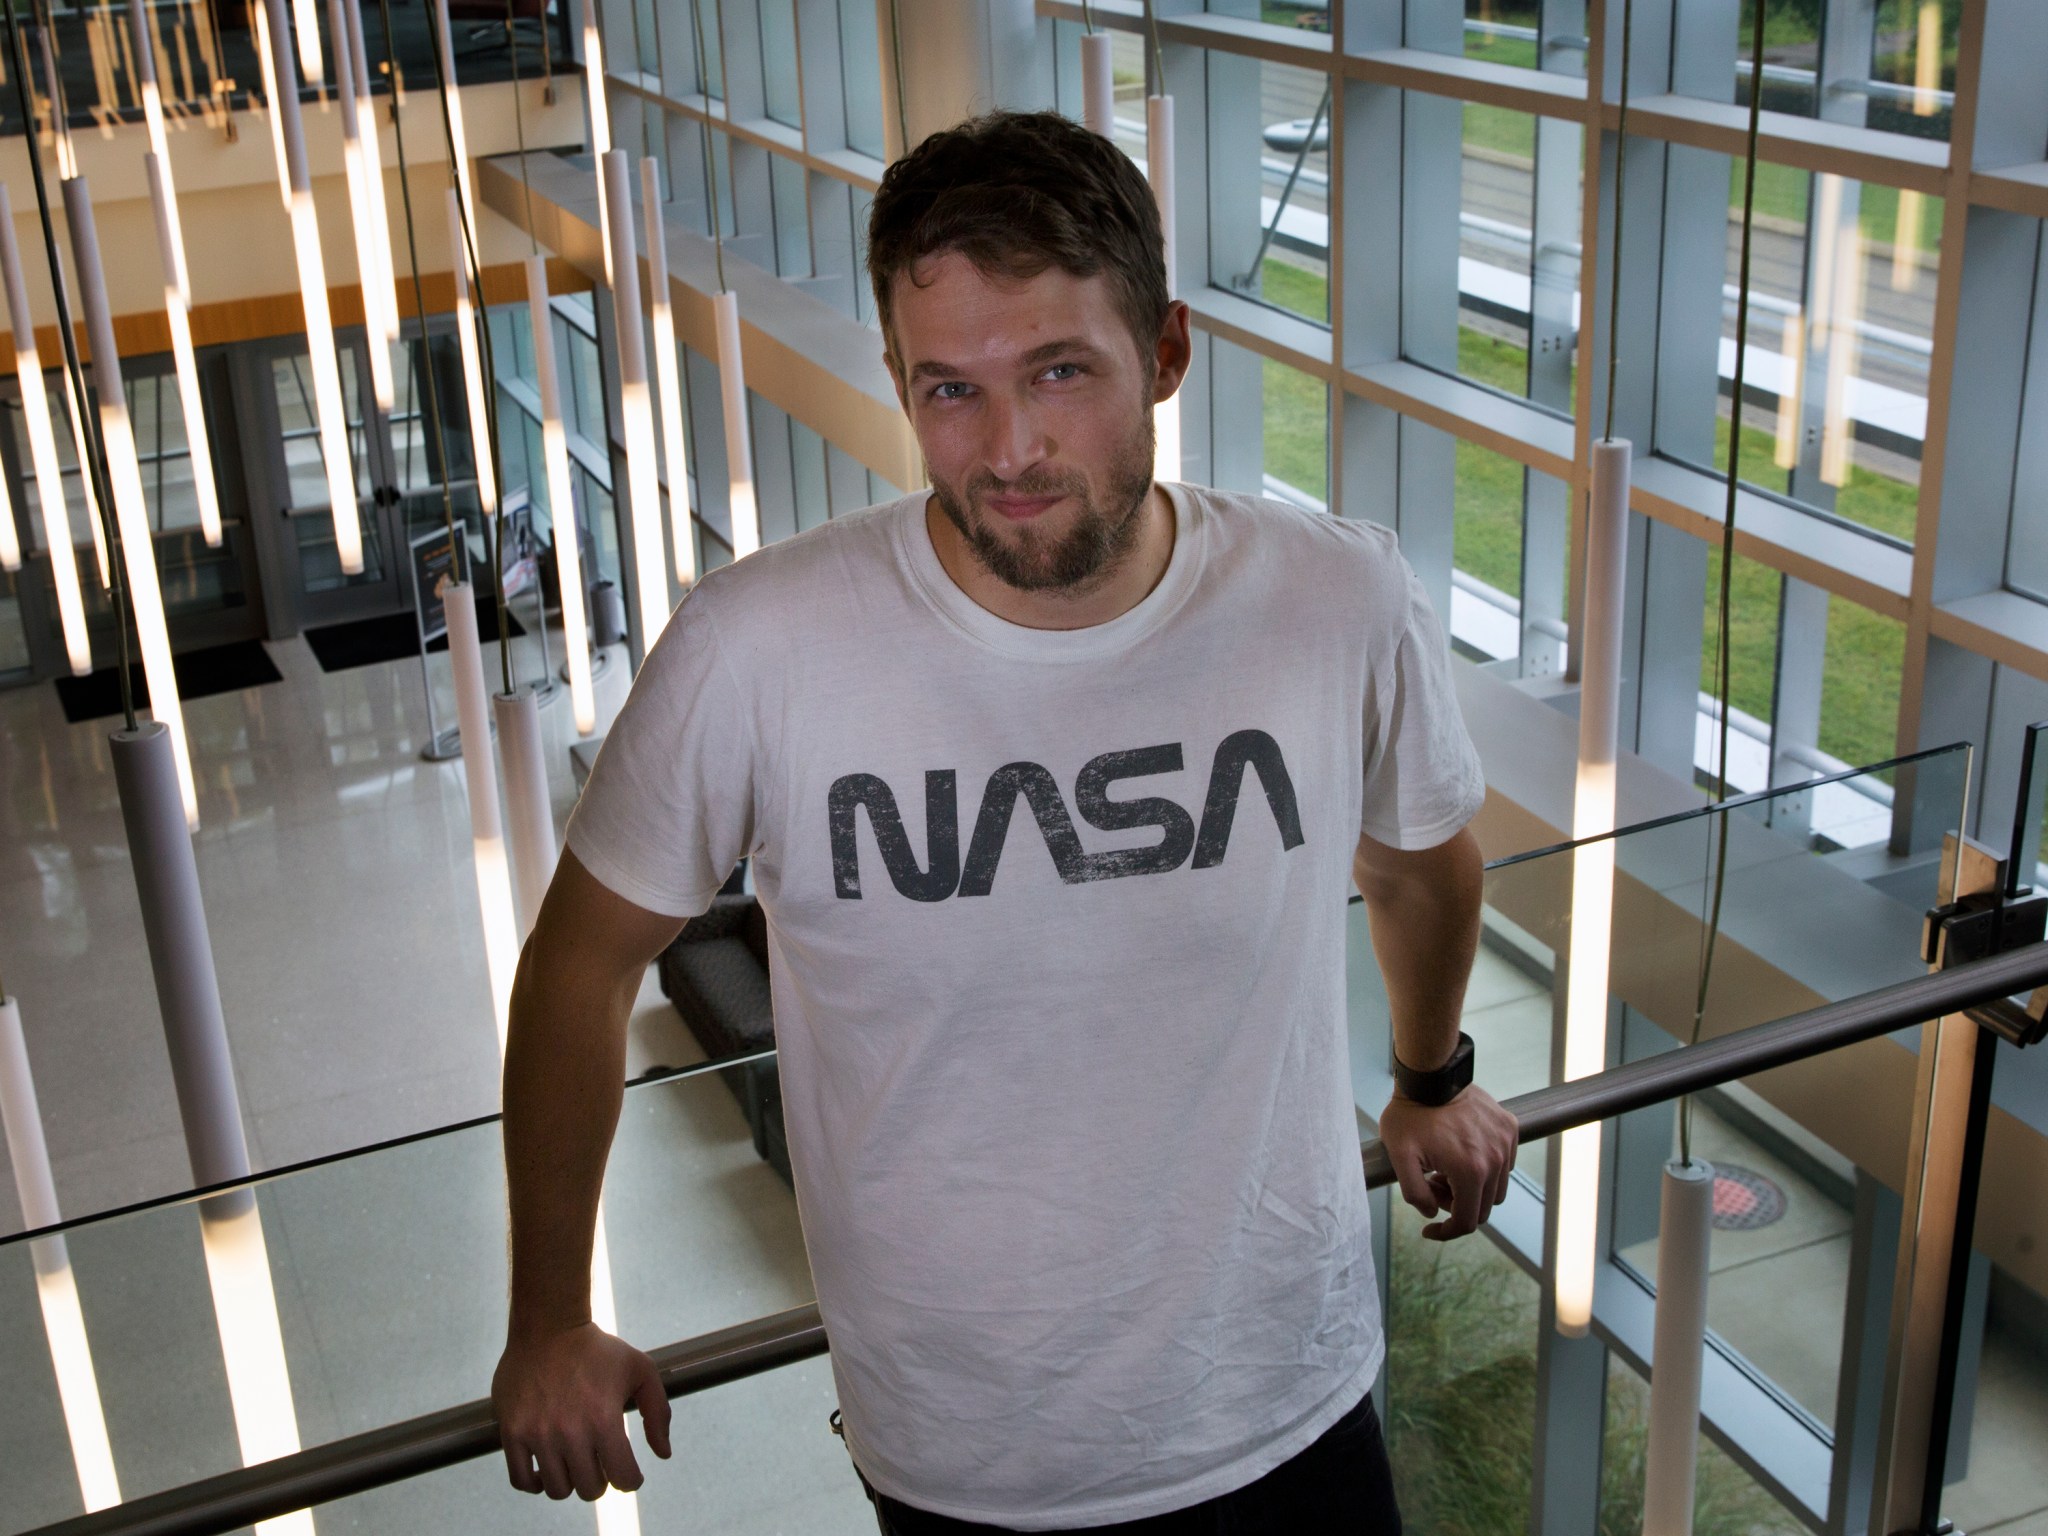 Kenneth Smith, a structural dynamics engineer at NASA’s Langley Research Center, was featured in Forbes magazine